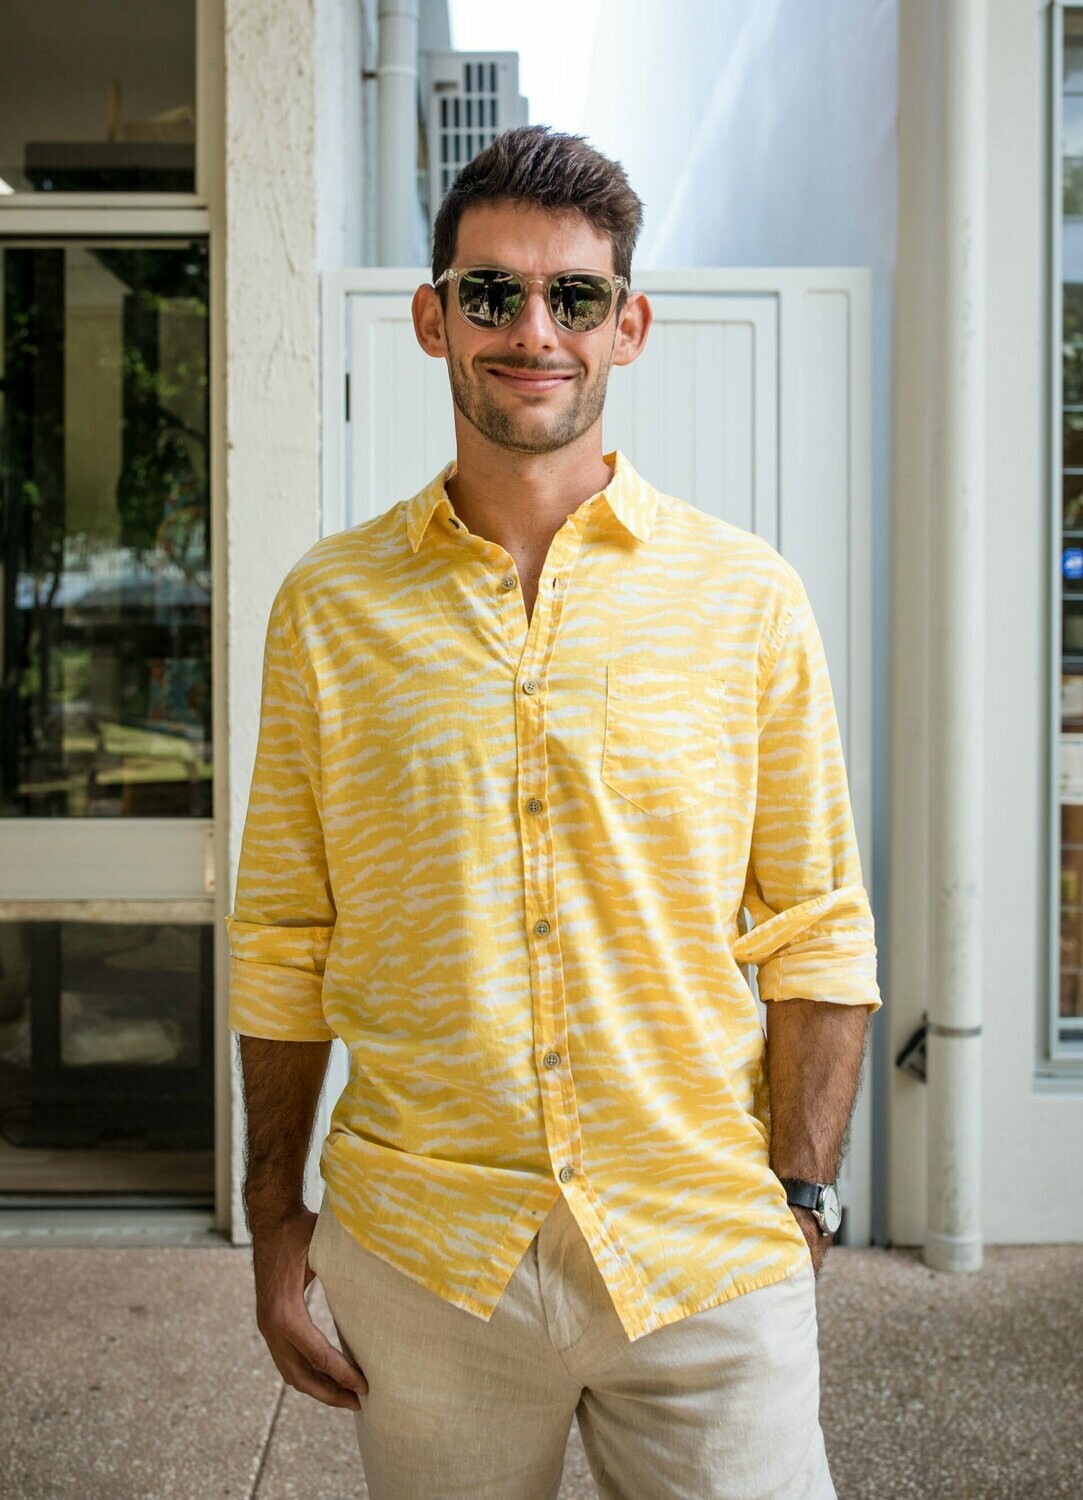 Long Sleeve Shirt. Canary yellow/white waves